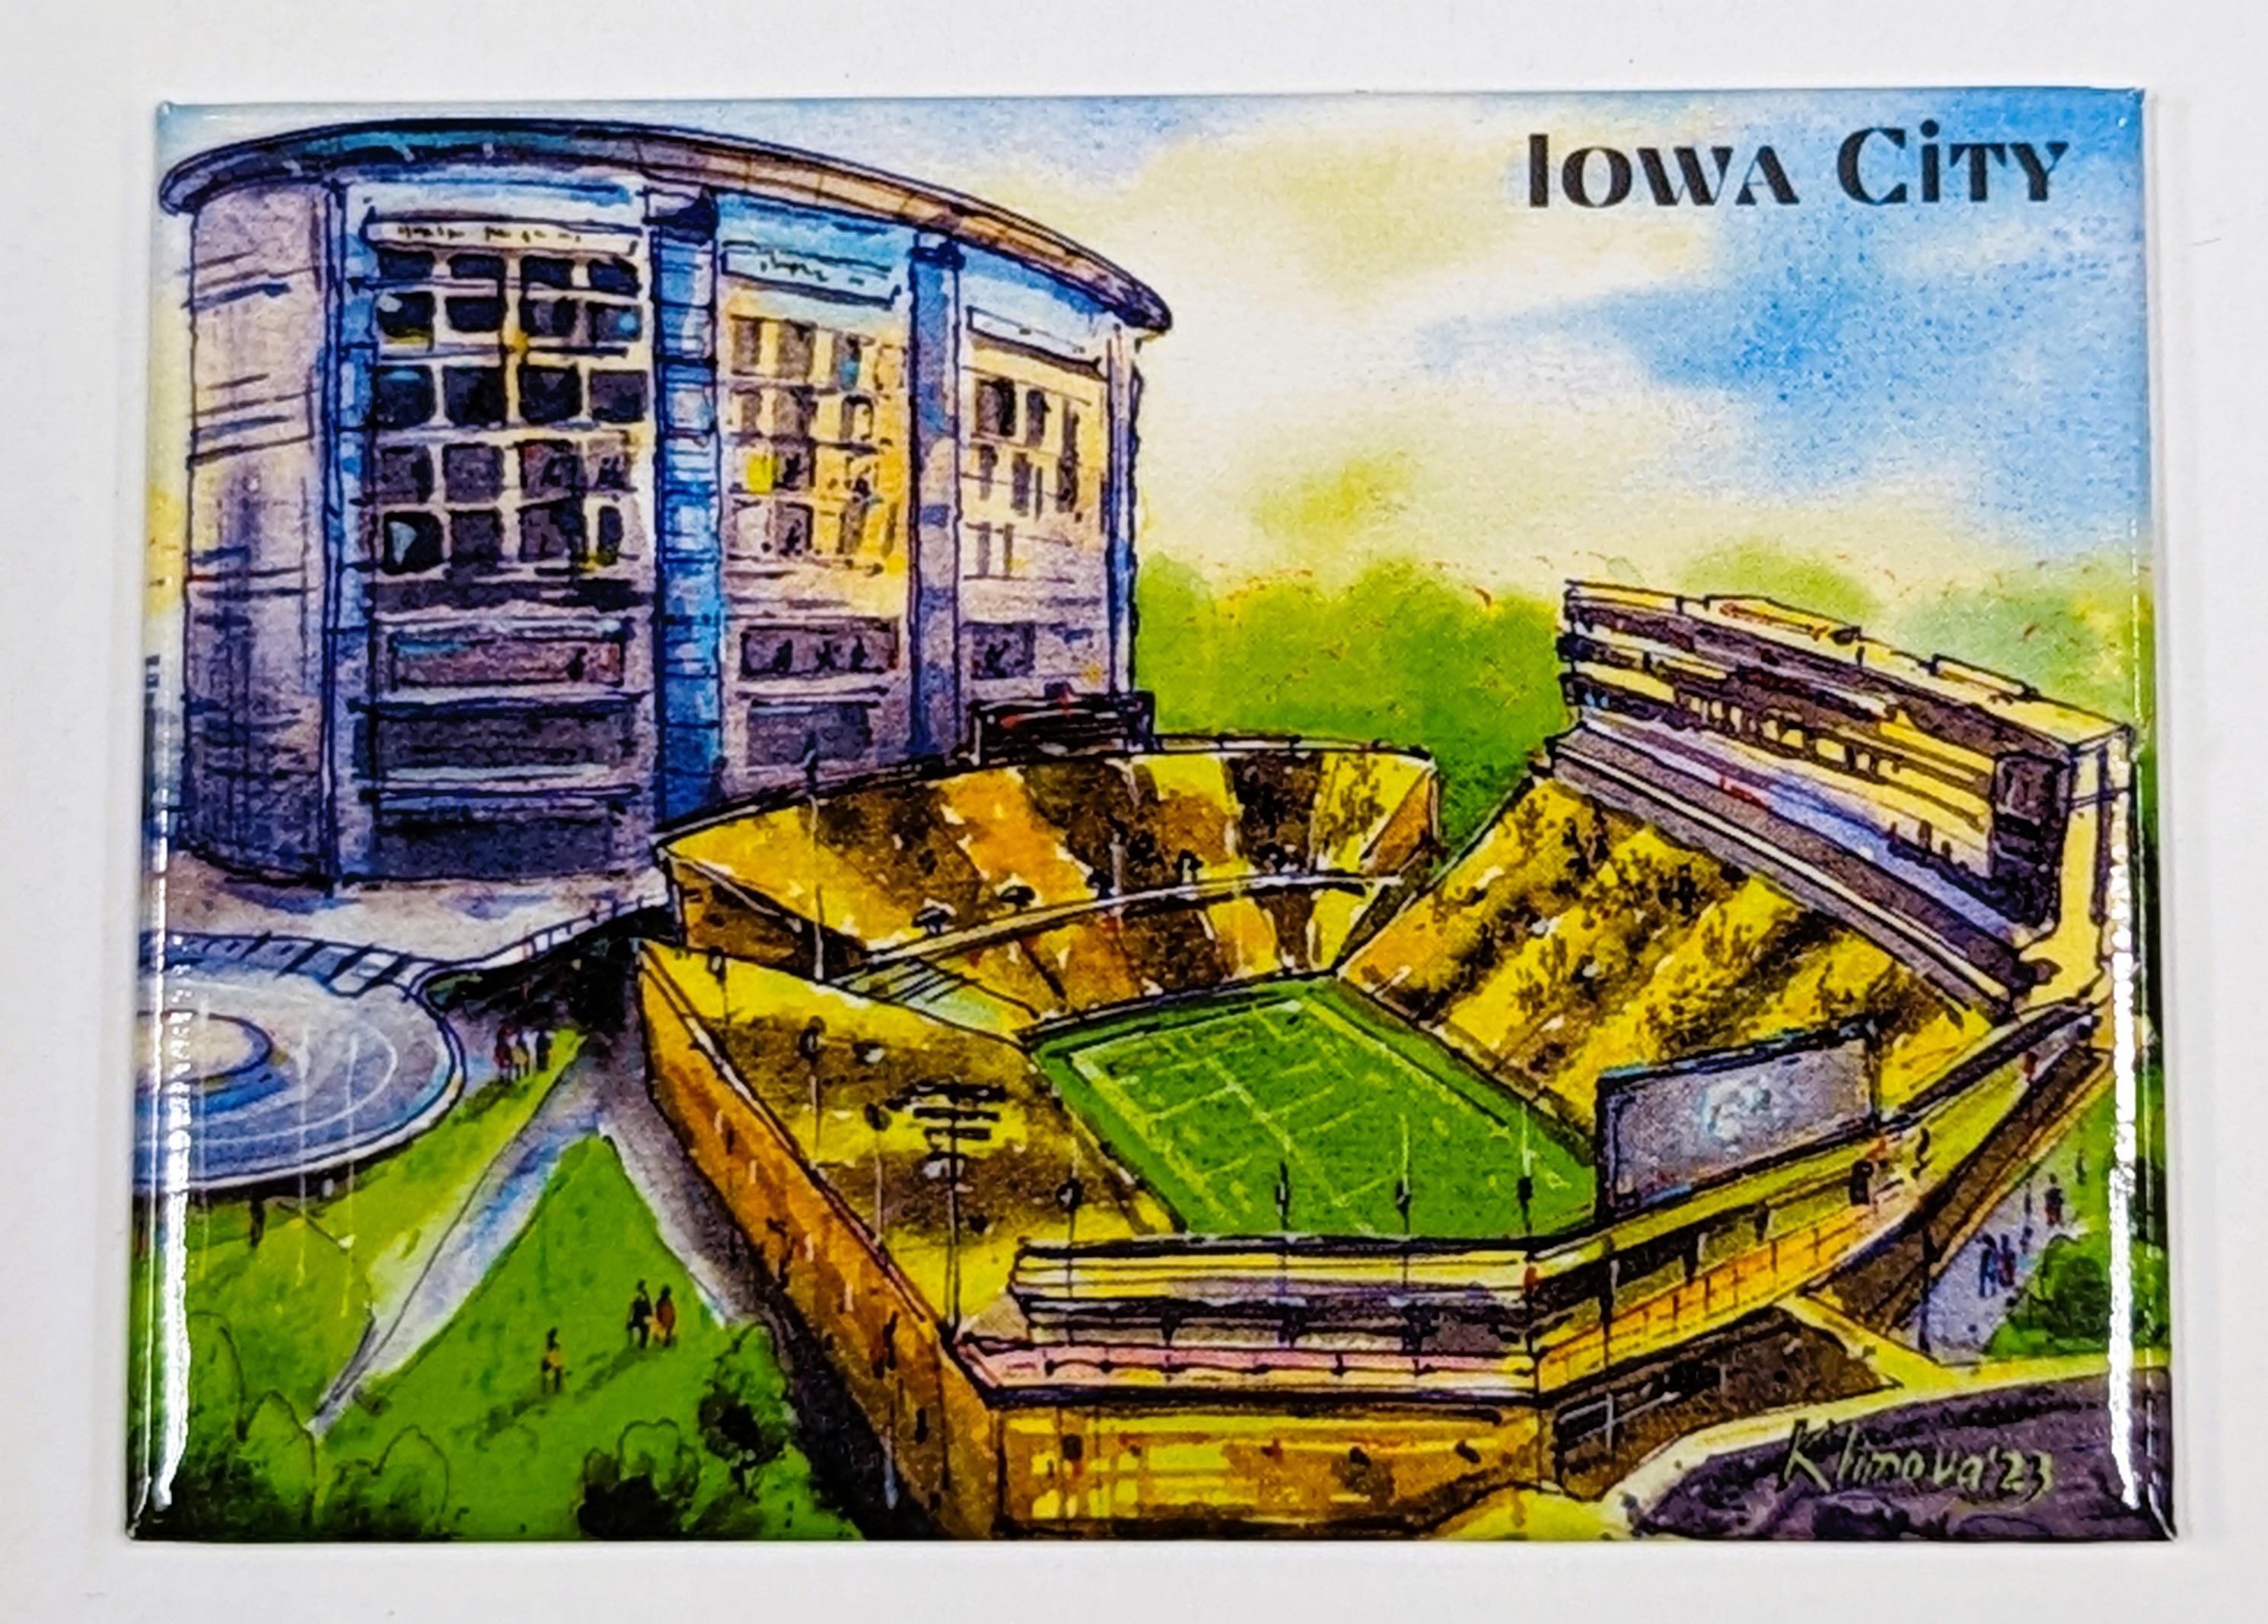 A view of the Stead Family Children's Hospital & Kinnick Stadium